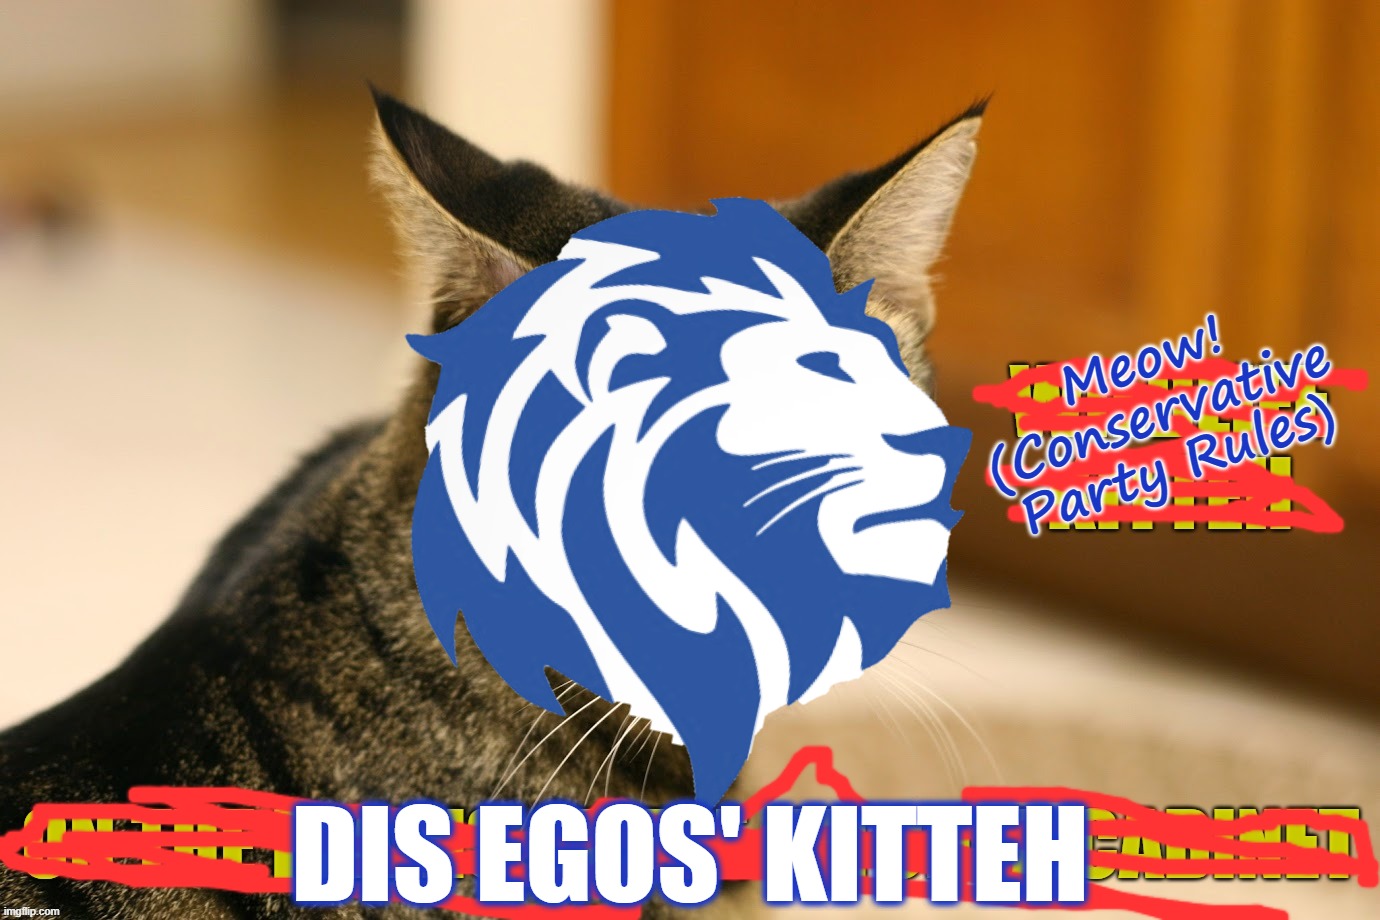 Elected to Congress and ready to fight for feline rights | Meow! (Conservative Party Rules); DIS EGOS' KITTEH | image tagged in memes,kitteh,conservative party,meow,egos | made w/ Imgflip meme maker